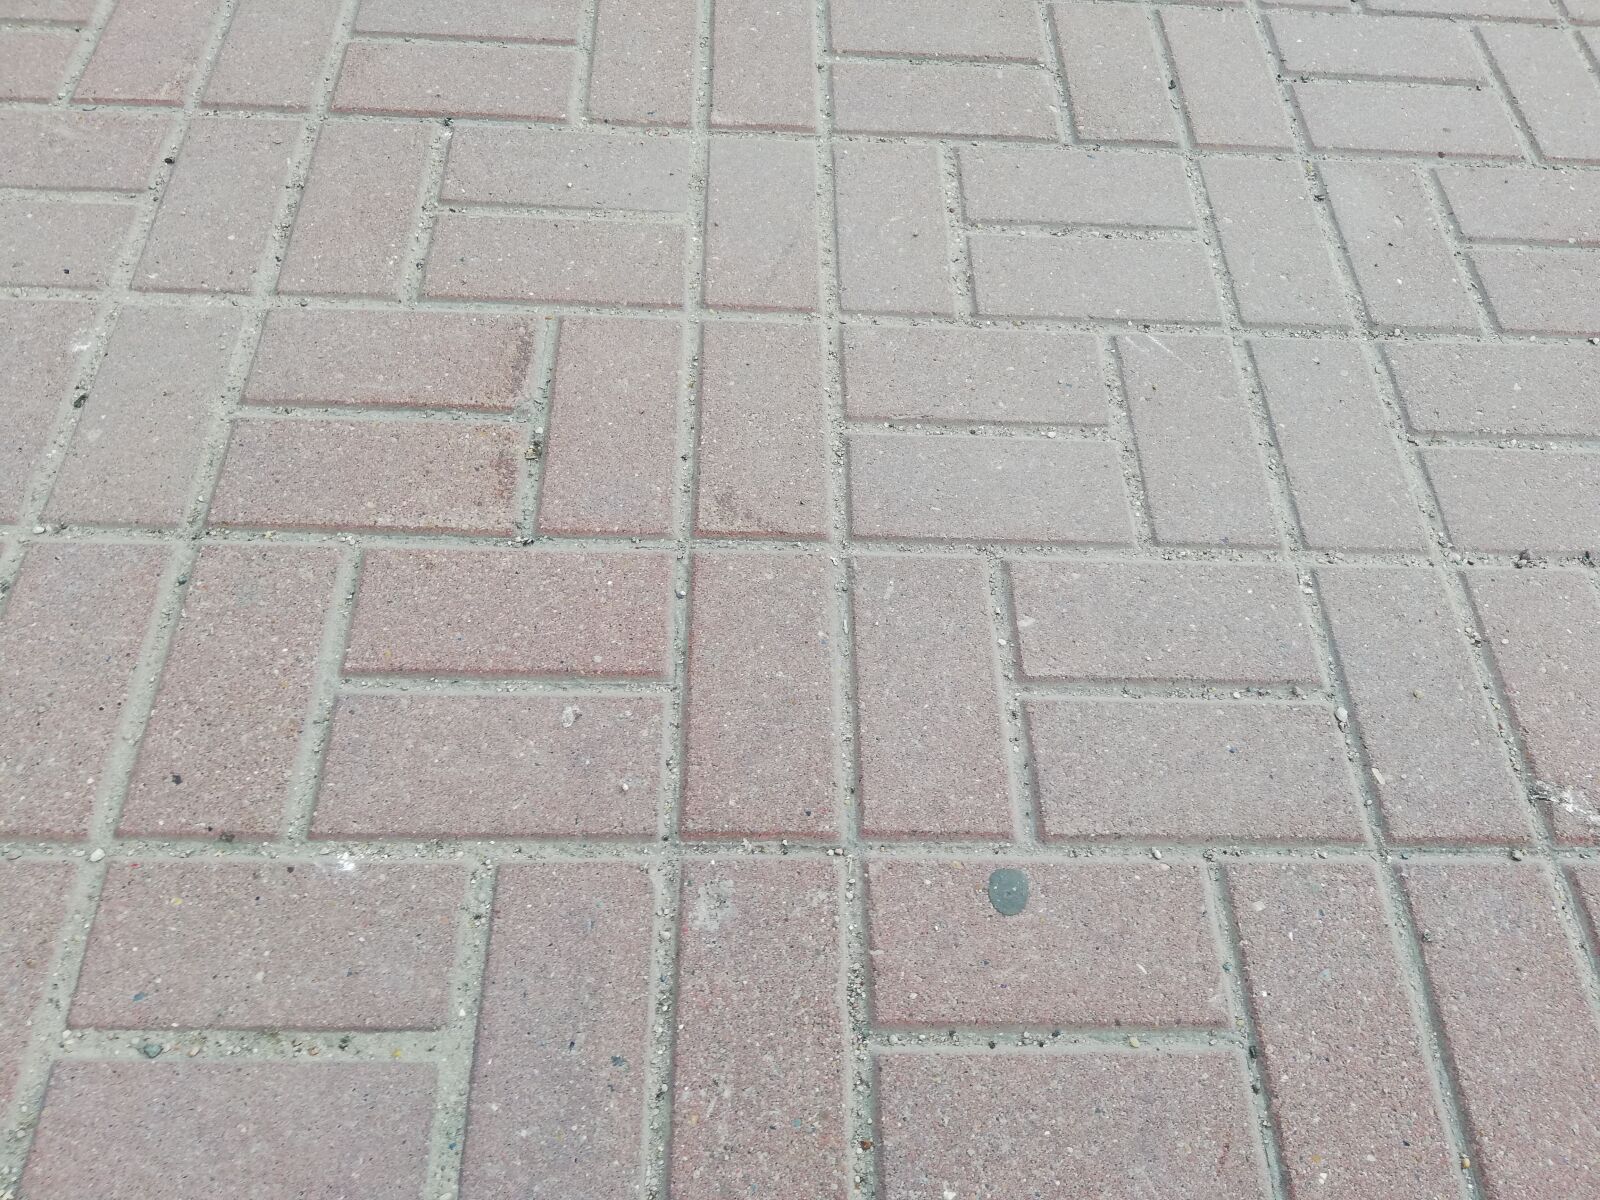 HUAWEI ANE-LX1 sample photo. Tile, road, day photography